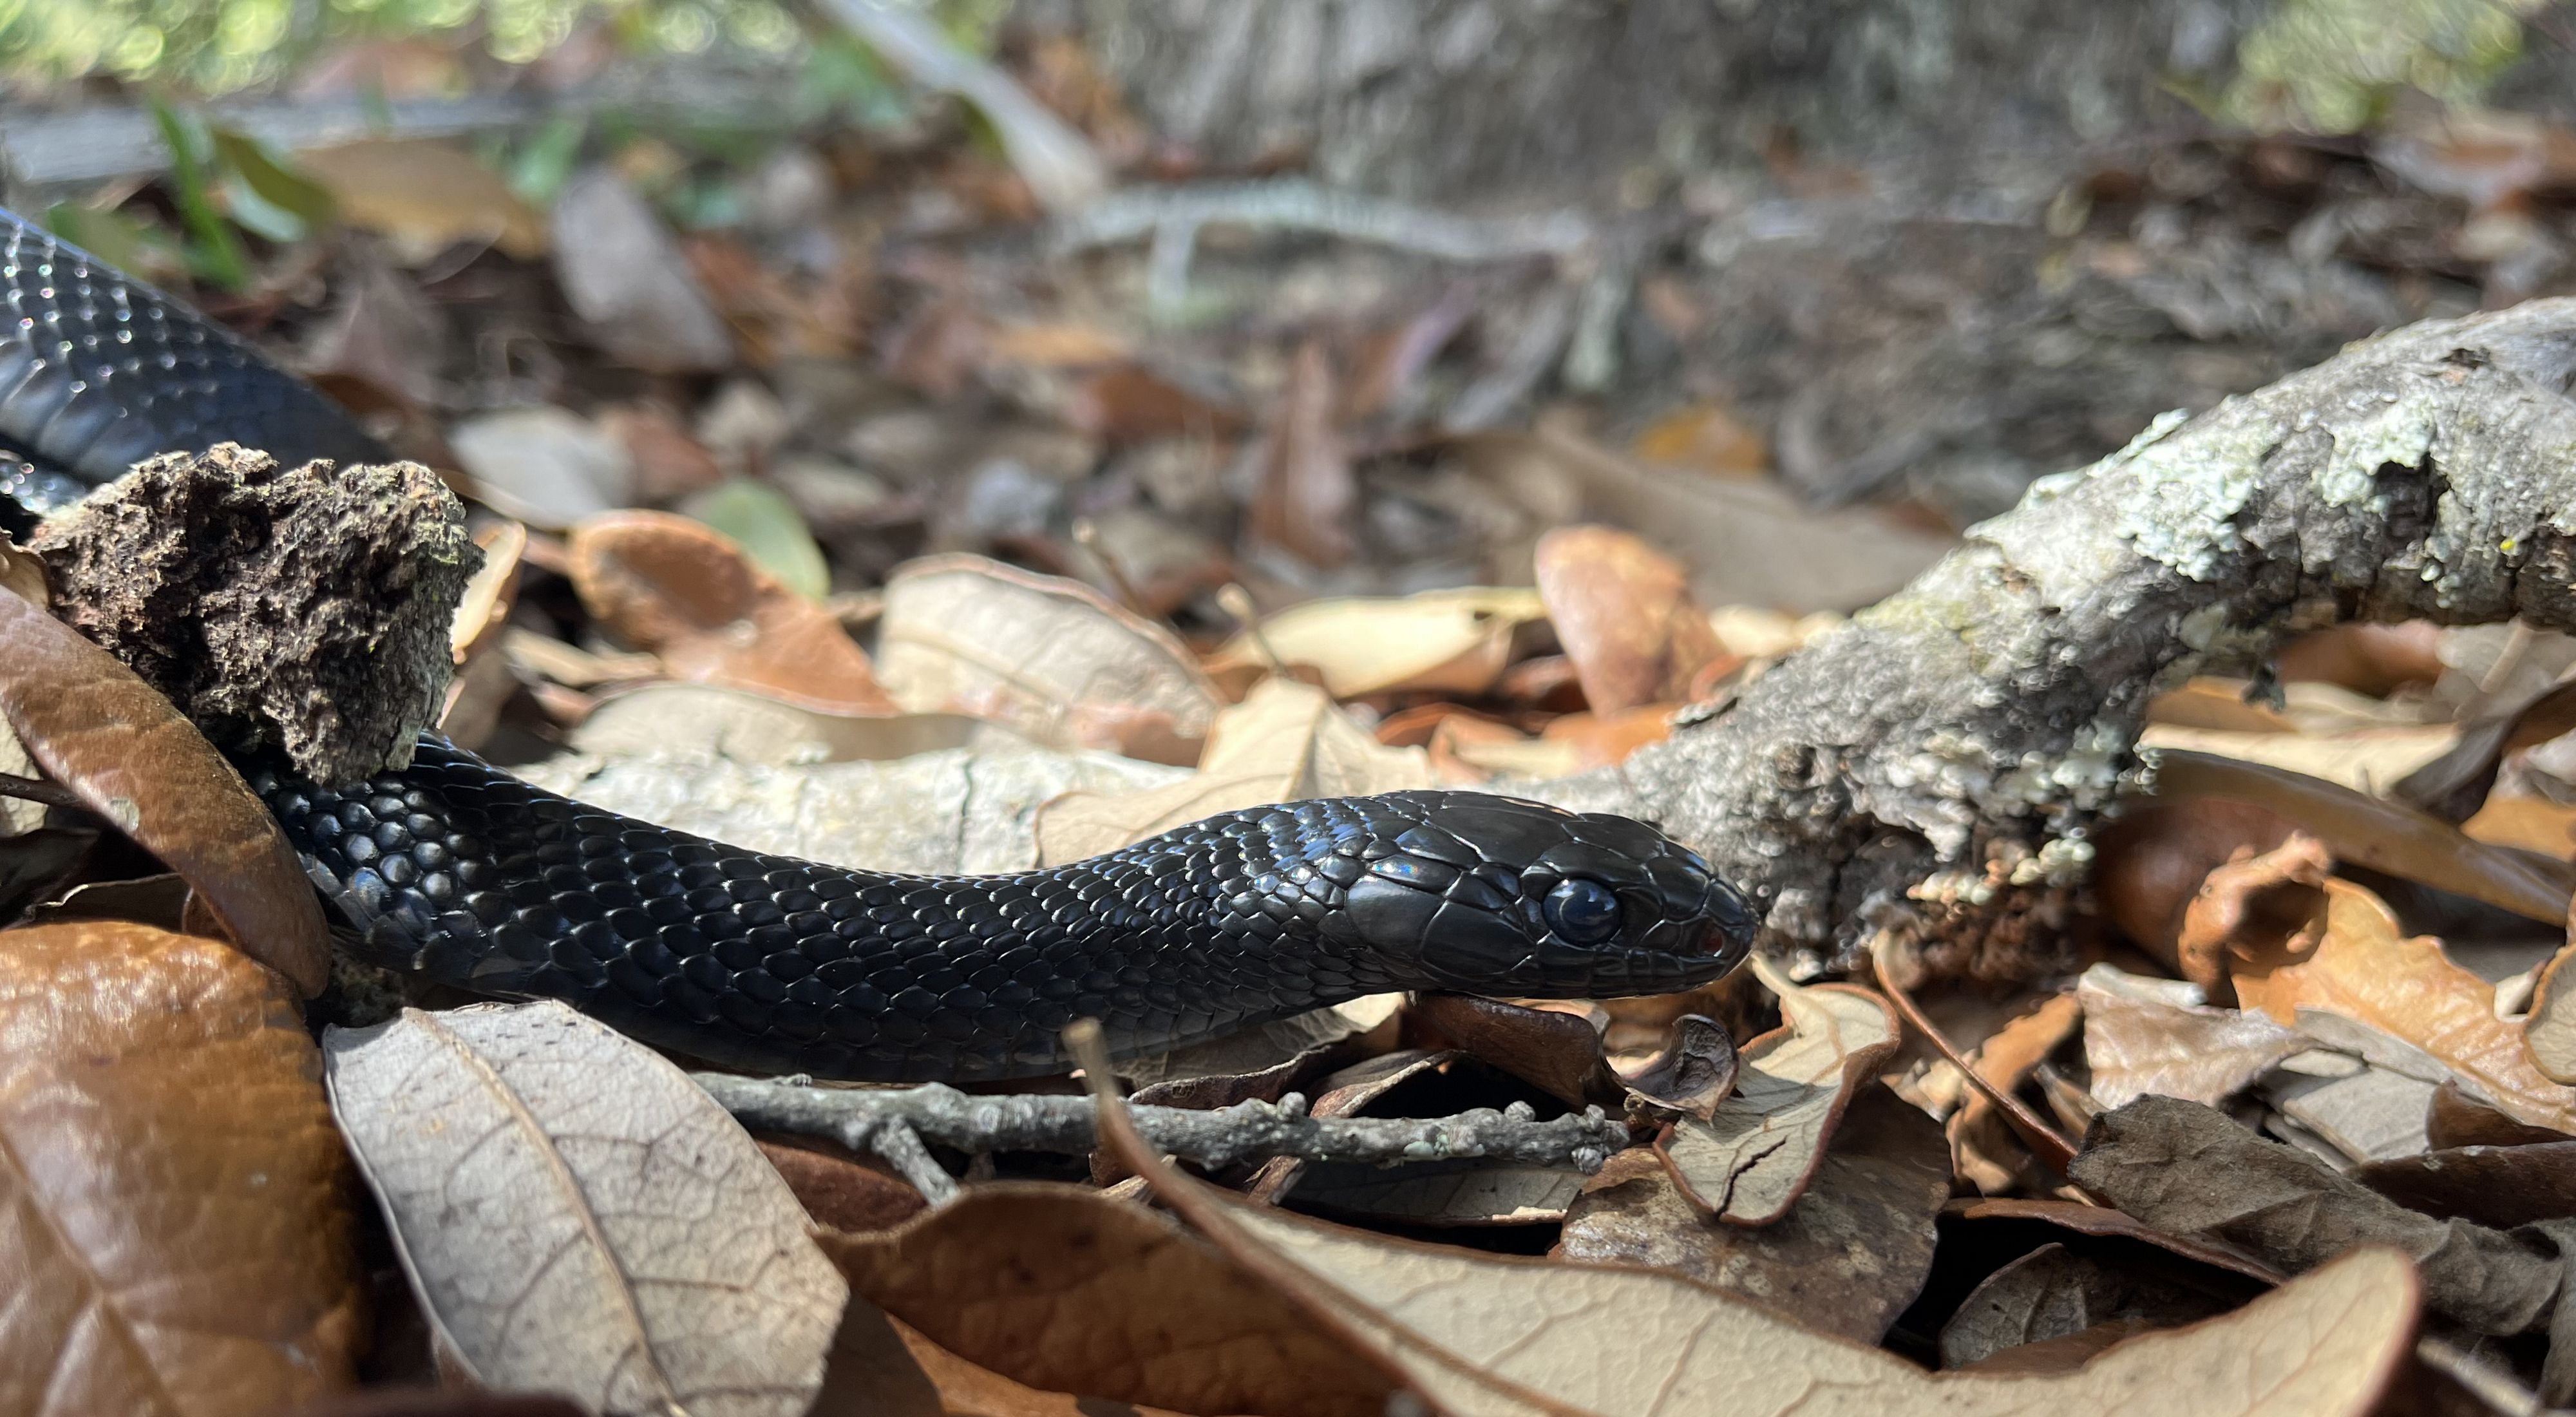 An eastern indigo snake, a small, black snake, slithers across dried brown leaves on a forest floor.